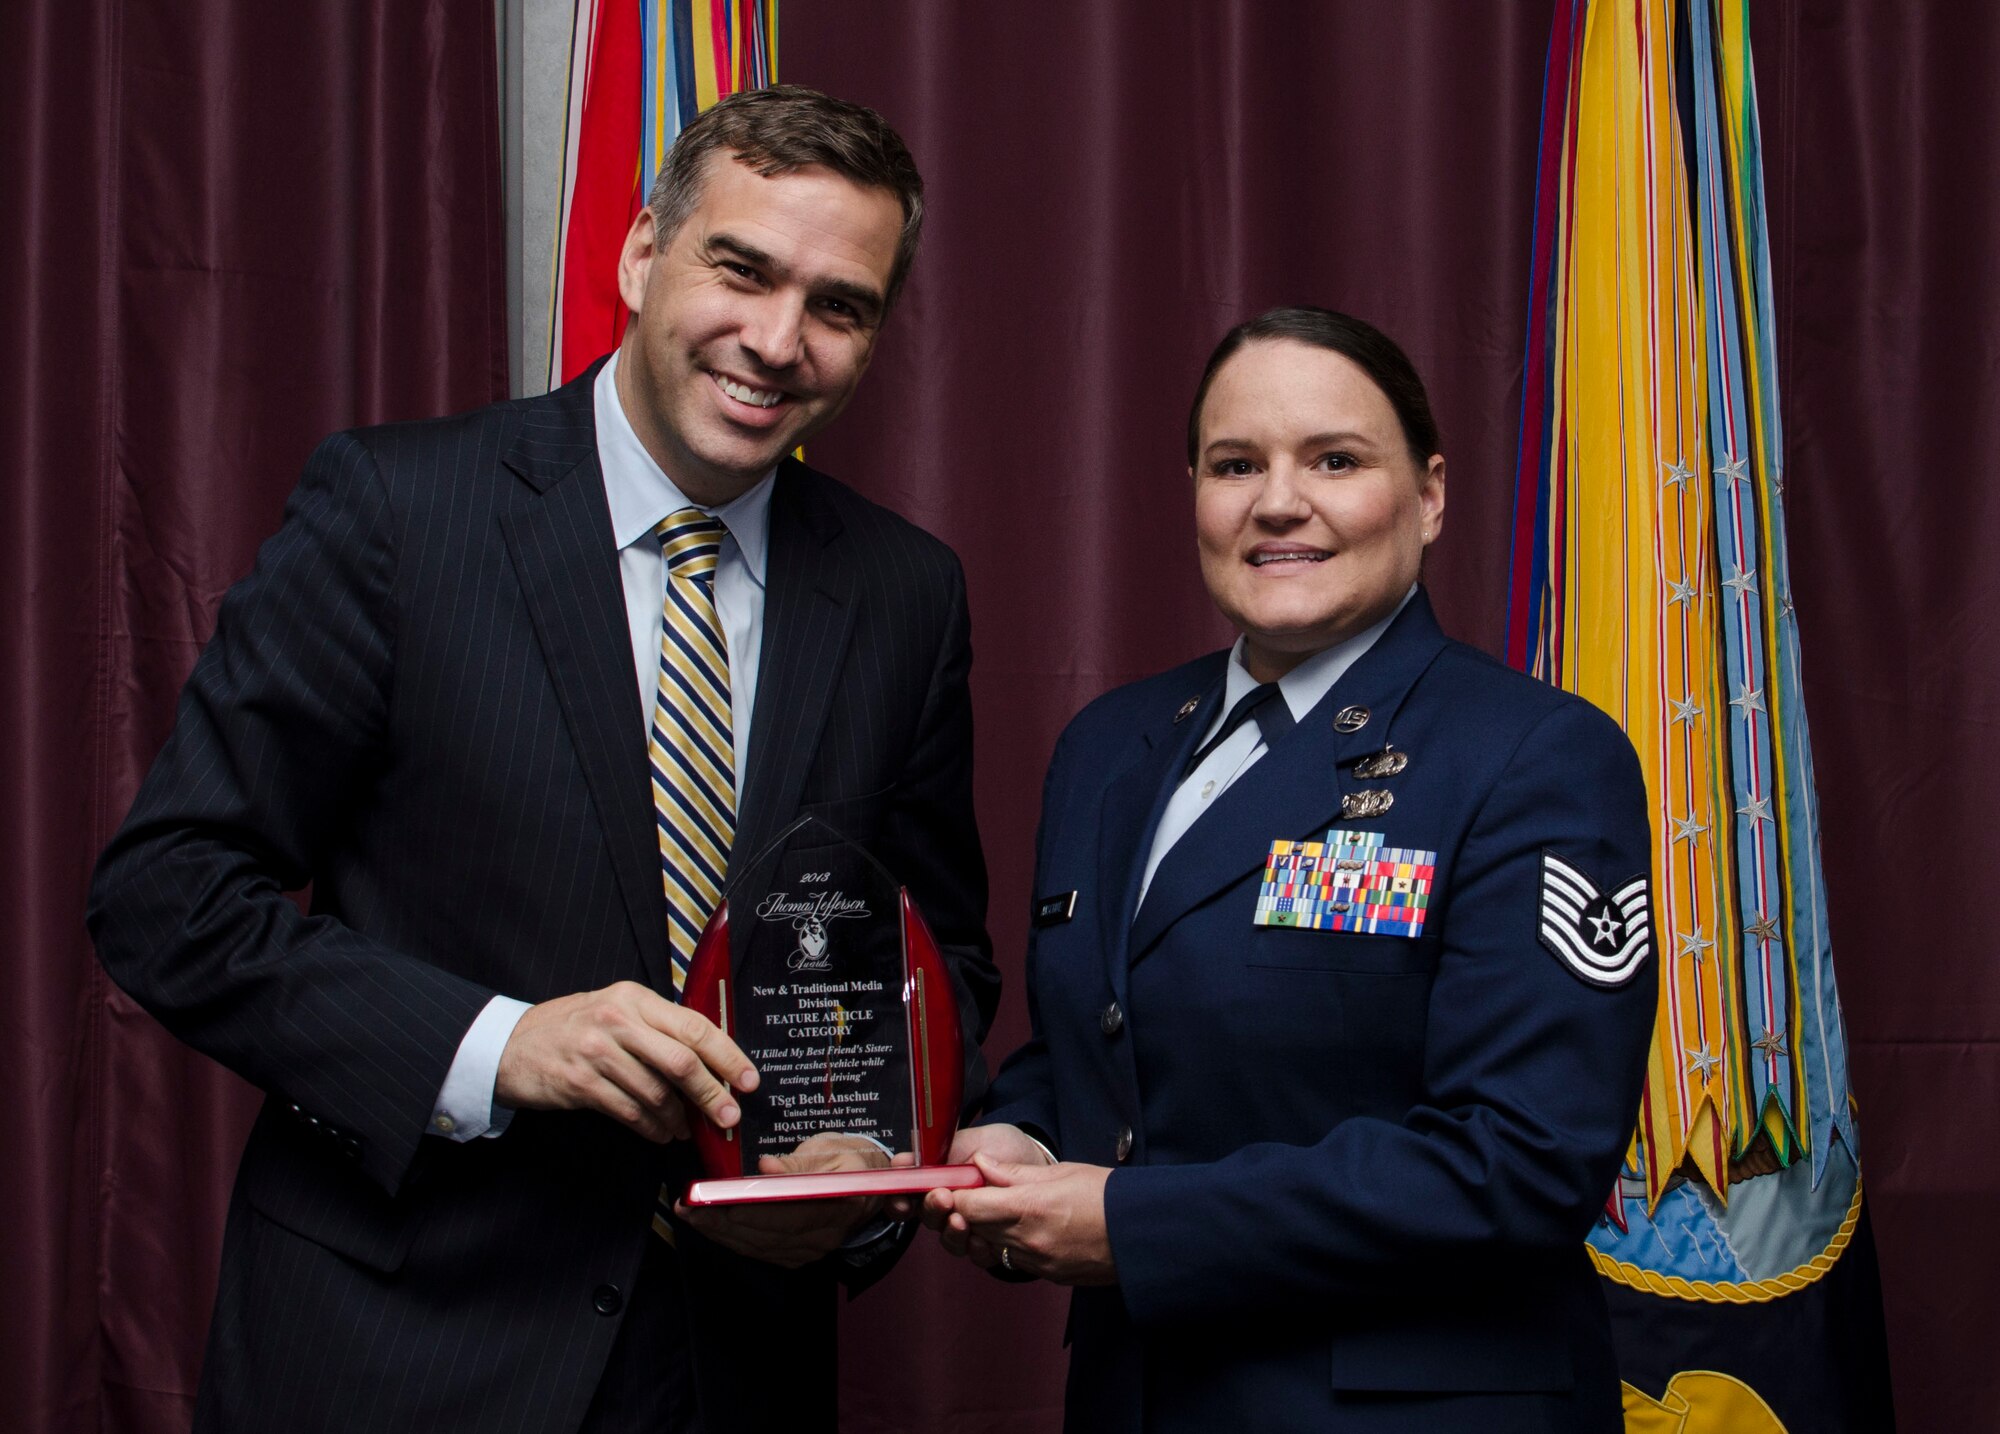 Tech. Sgt. Beth Anschutz, AETC Public Affairs at Joint Base San Antonio-Randolph, Texas, receives the Thomas Jefferson Award (feature category) from Brent Colburn, Assistant to the Secretary of Defense for Public Affairs, during an award ceremony at the Defense Information School, Fort George G. Meade, Maryland May 9, 2014. Anschutz won for her gripping tale about the consequences of texting and driving.. (Courtesy photo) 
